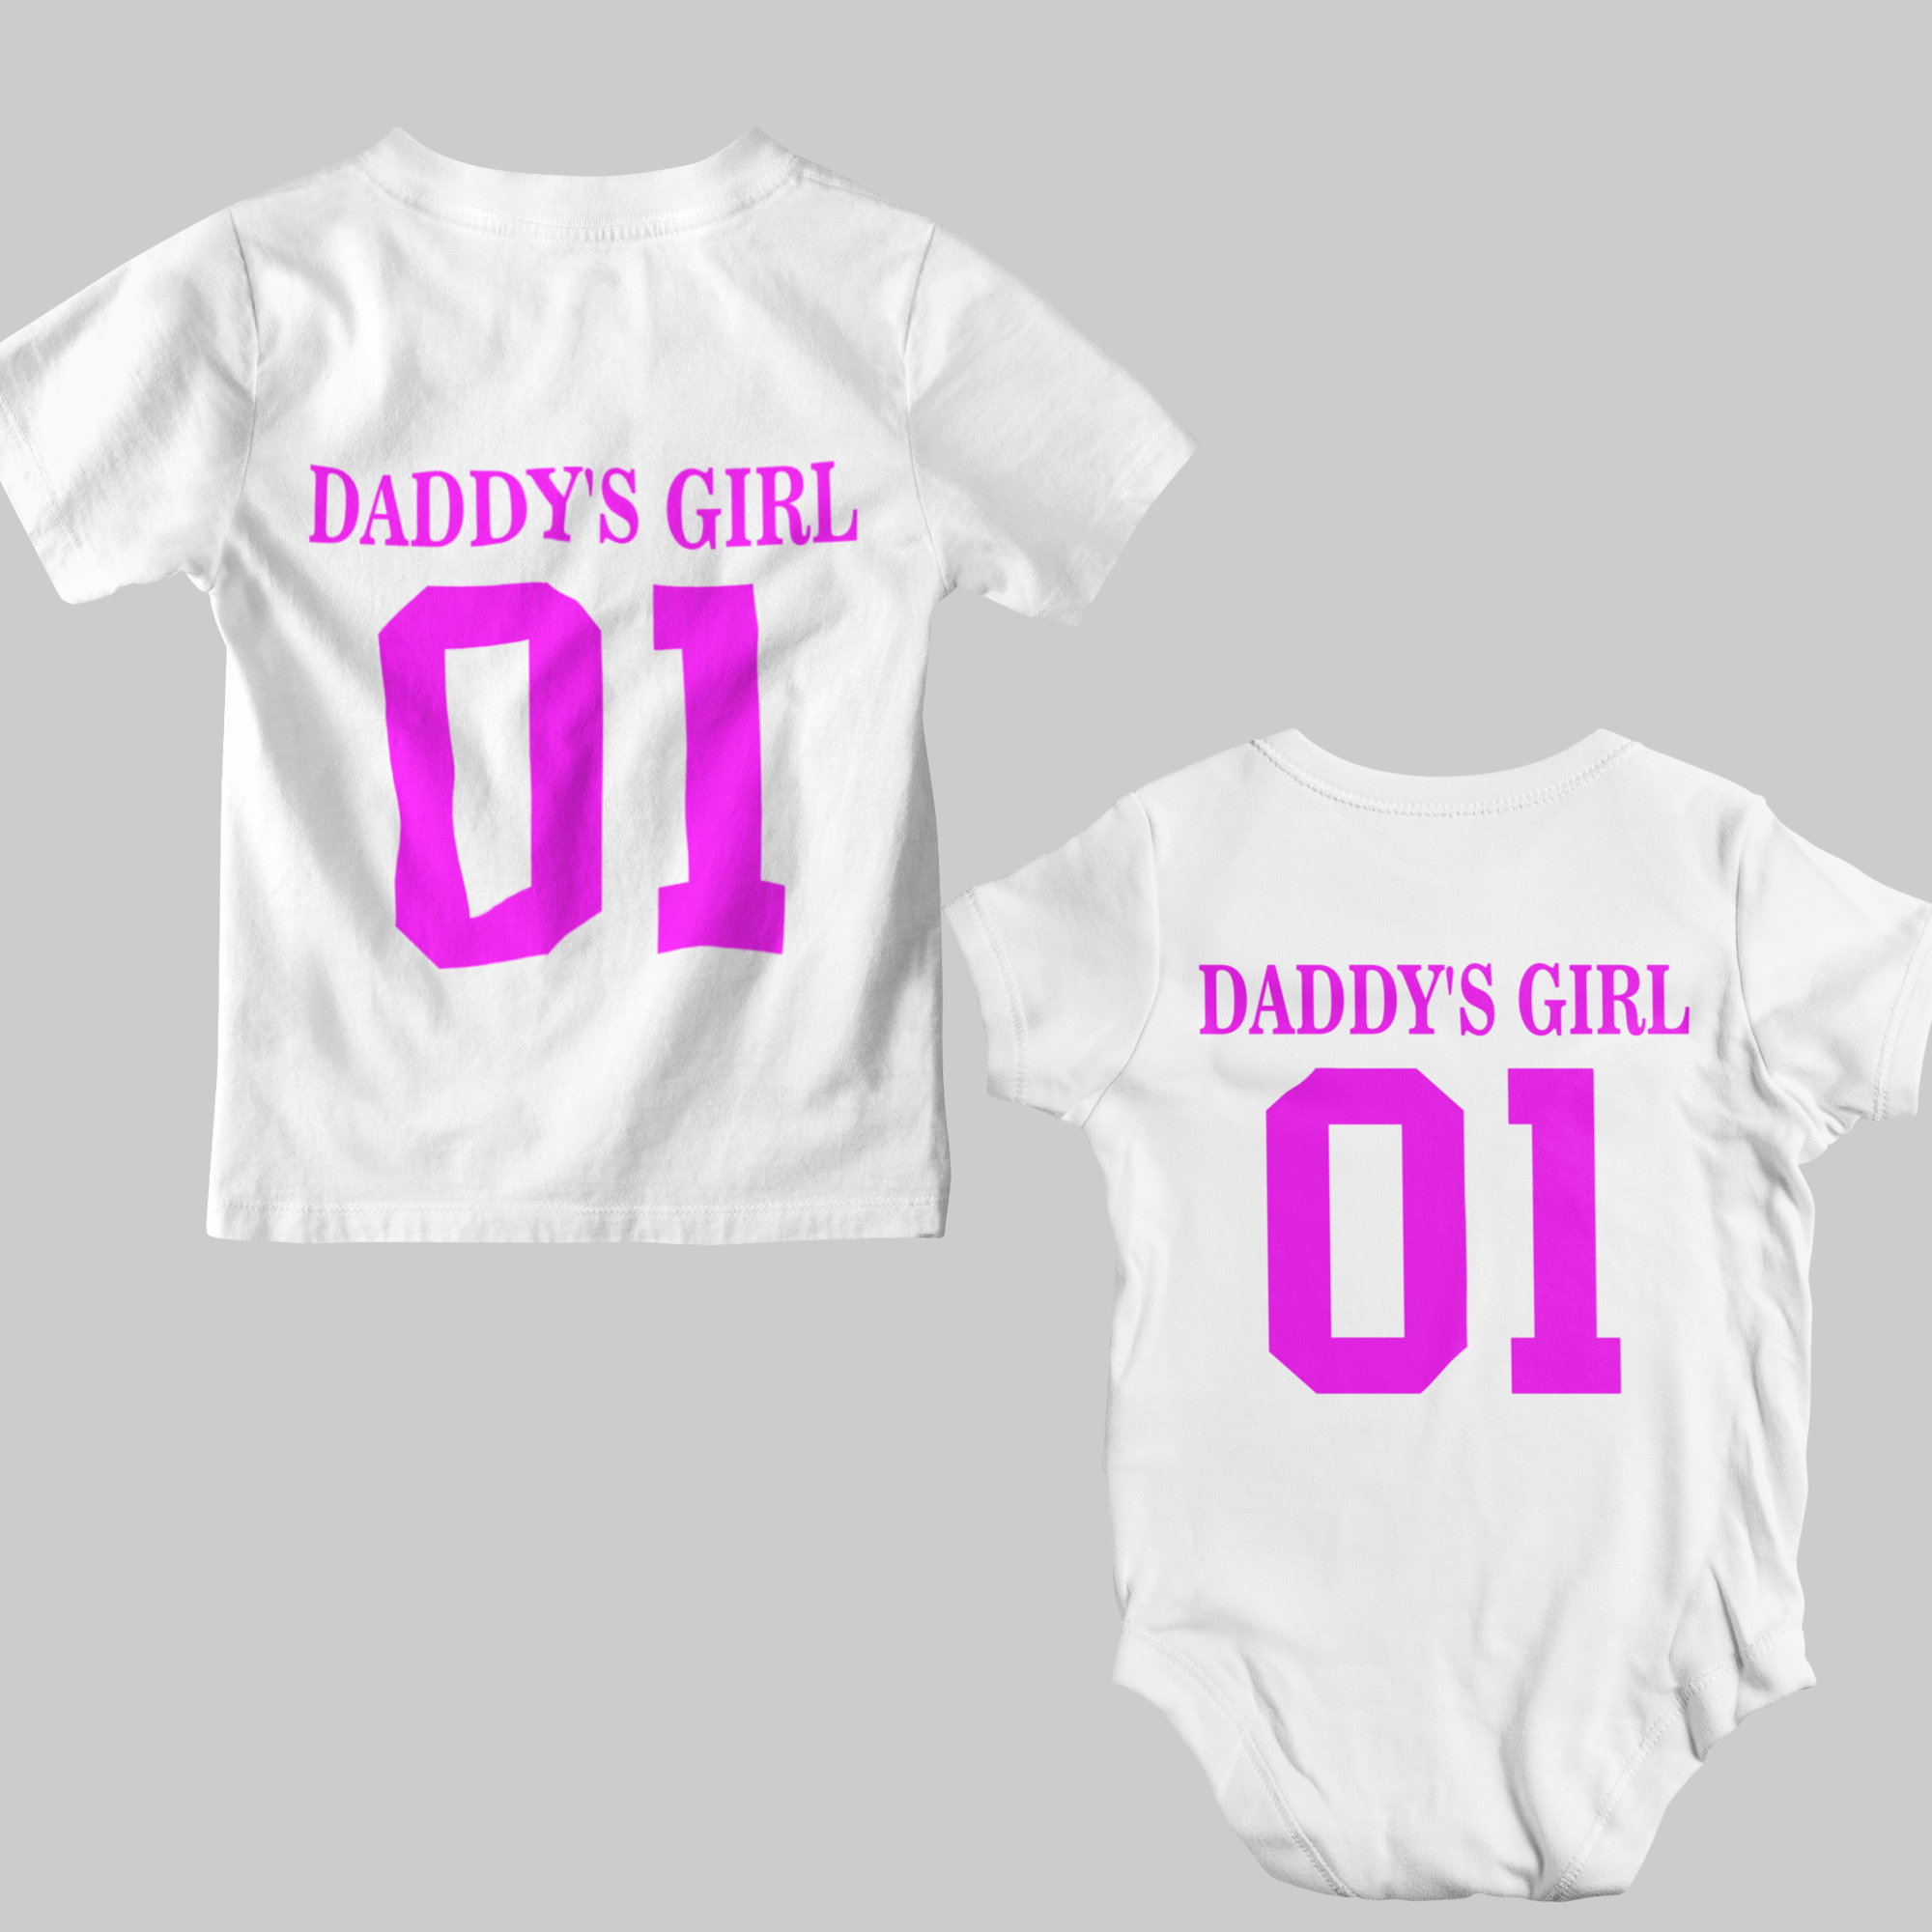 Daddy + Daddy's Girl Number Combo Black & White - Adult Tshirt + Full Romper